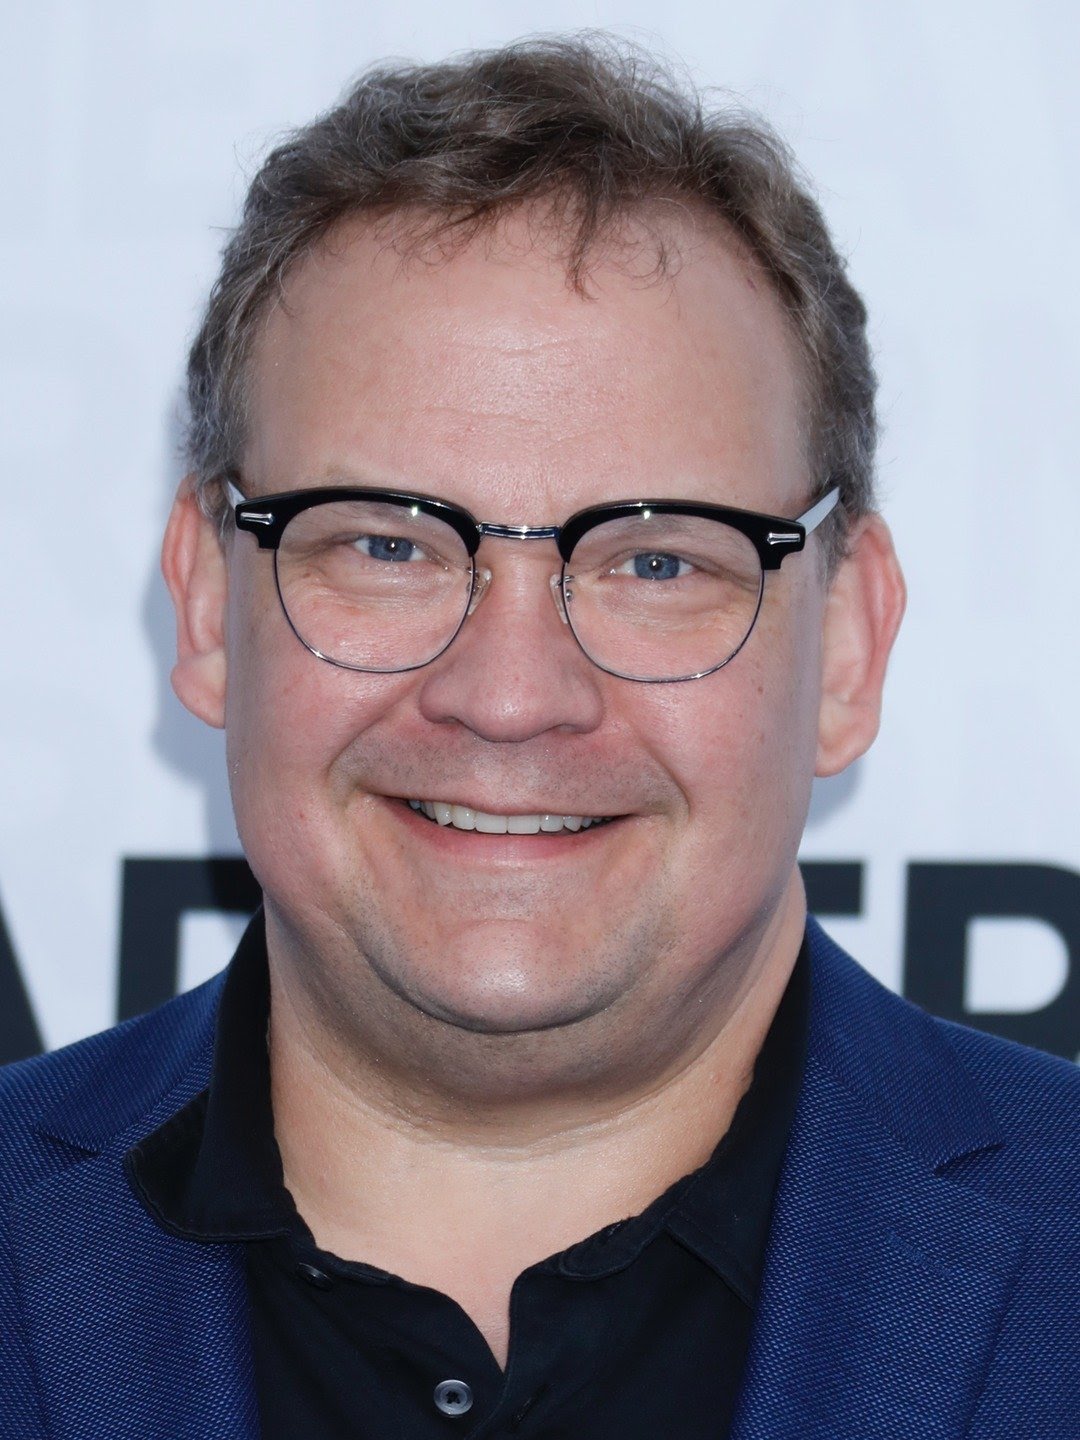 Andy Richter He Lived On Blackjack Circle From Longwood Elementary School Shalimar Fl William Henry Shaw Hs 1982 Columbus People Savannah Chat Columbus Ga